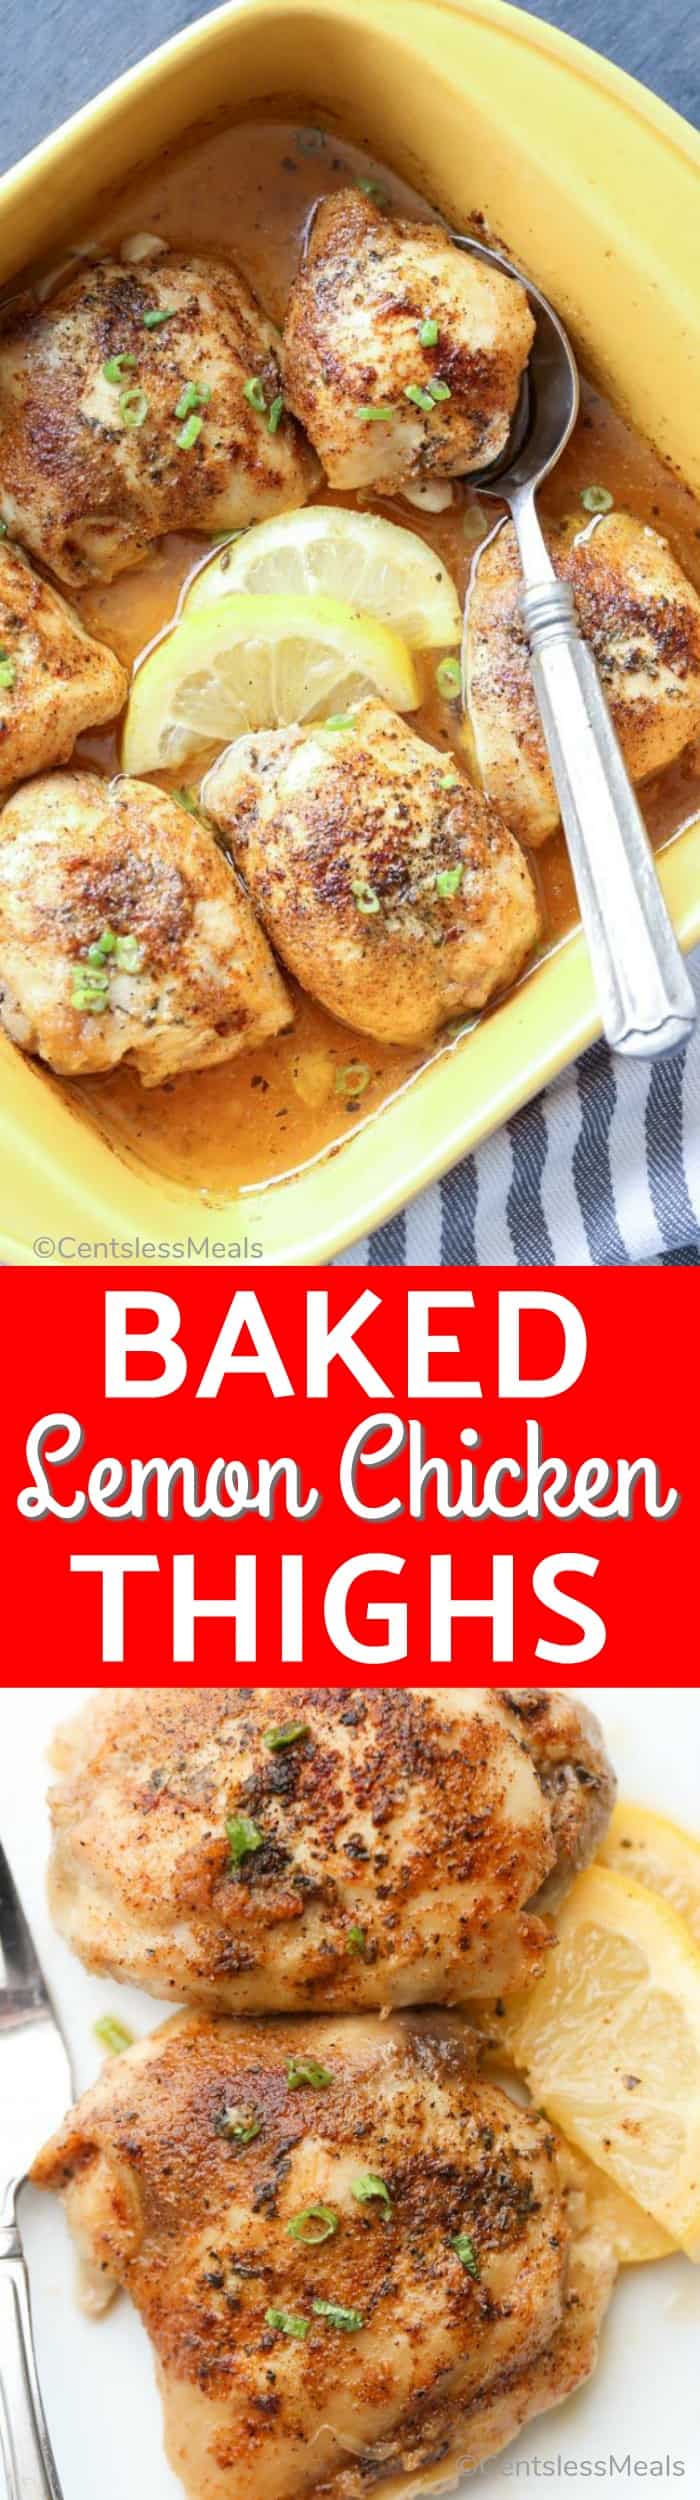 Baked lemon chicken thighs on a plate and in a dish with writing